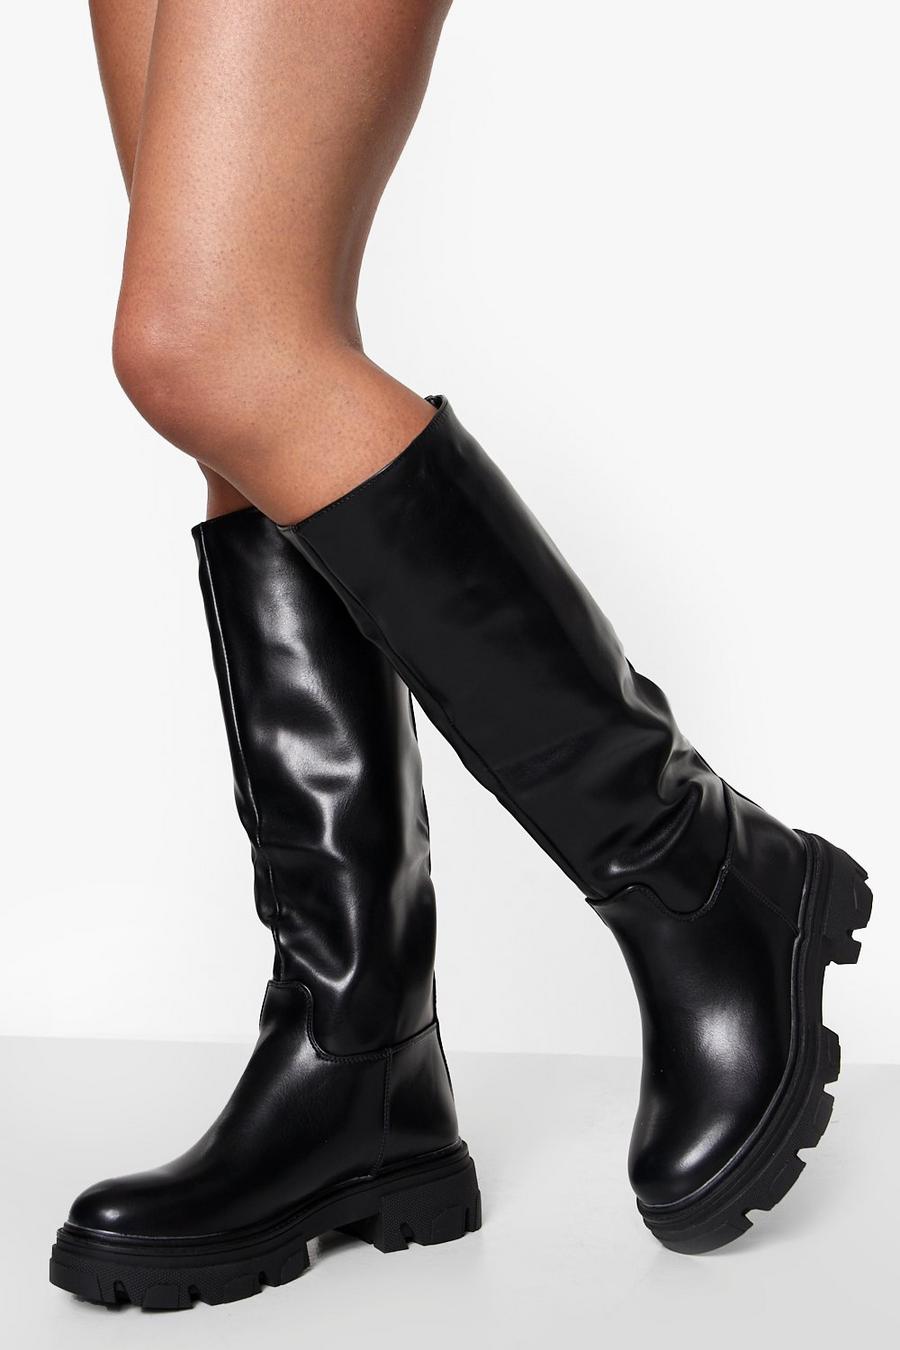 Black schwarz Cleated Sole Pull On Knee High Boots